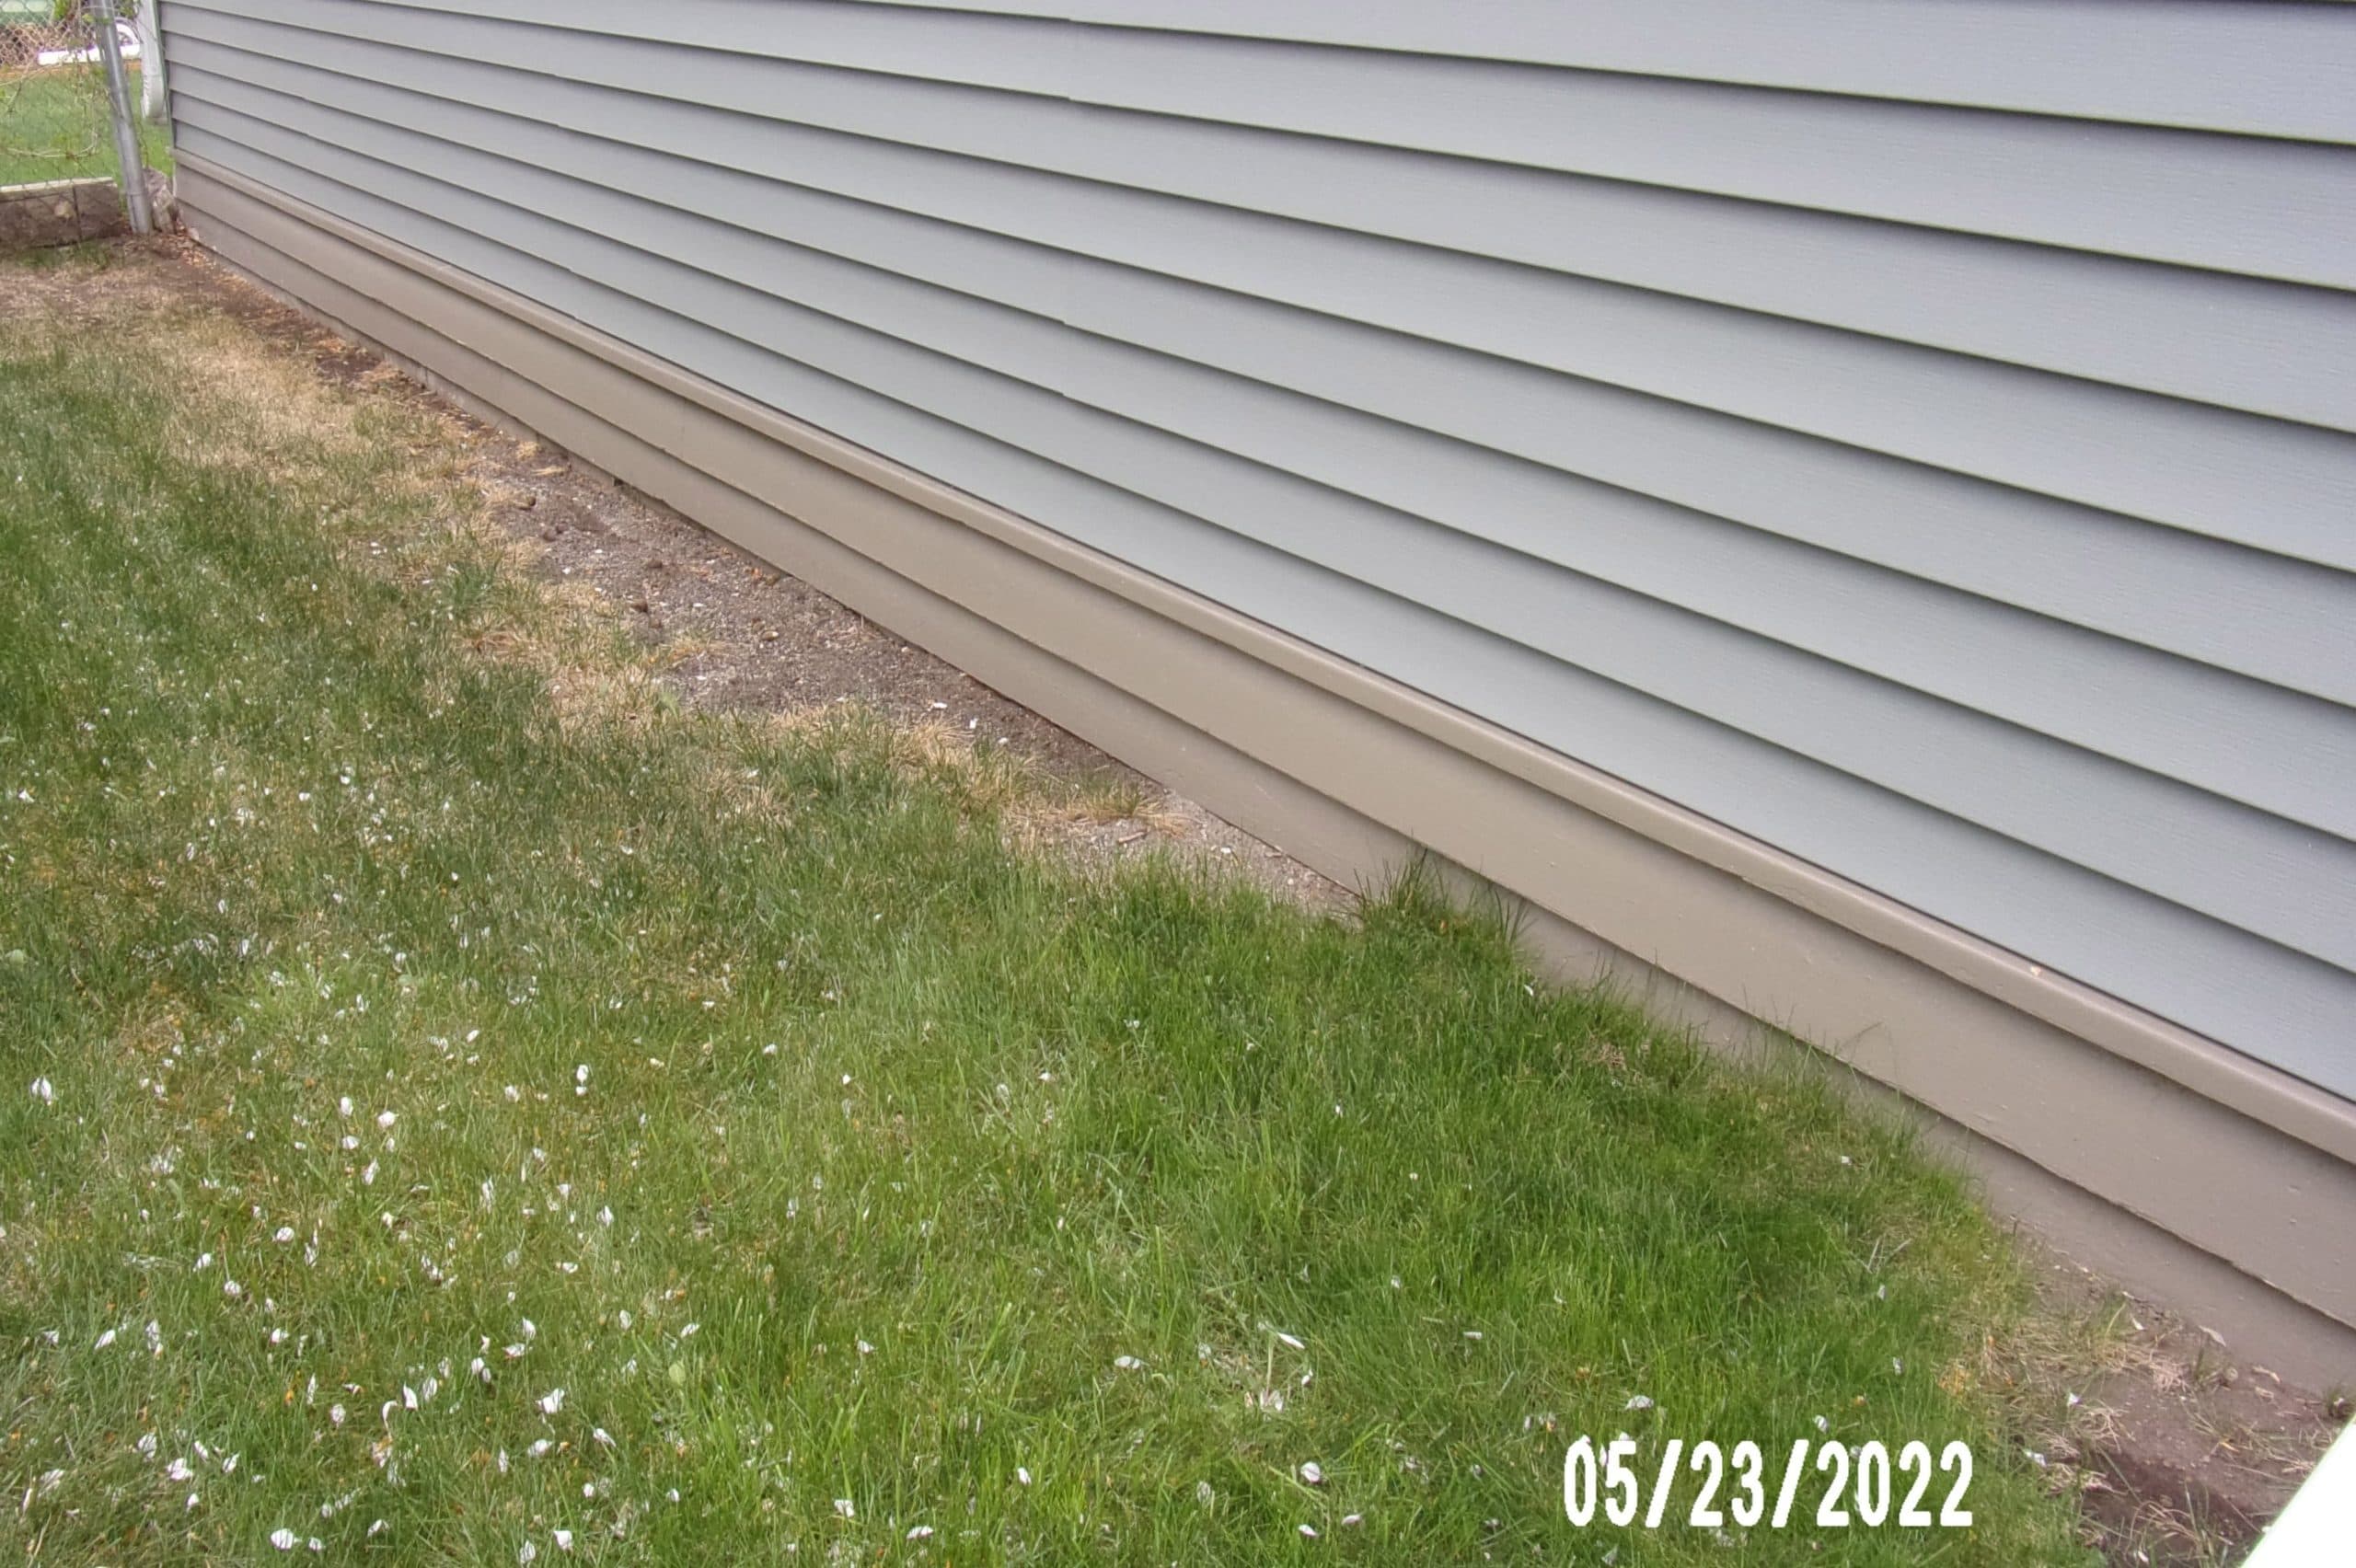 Before DIY Faux Stone Home Exterior Wainscoting (2)